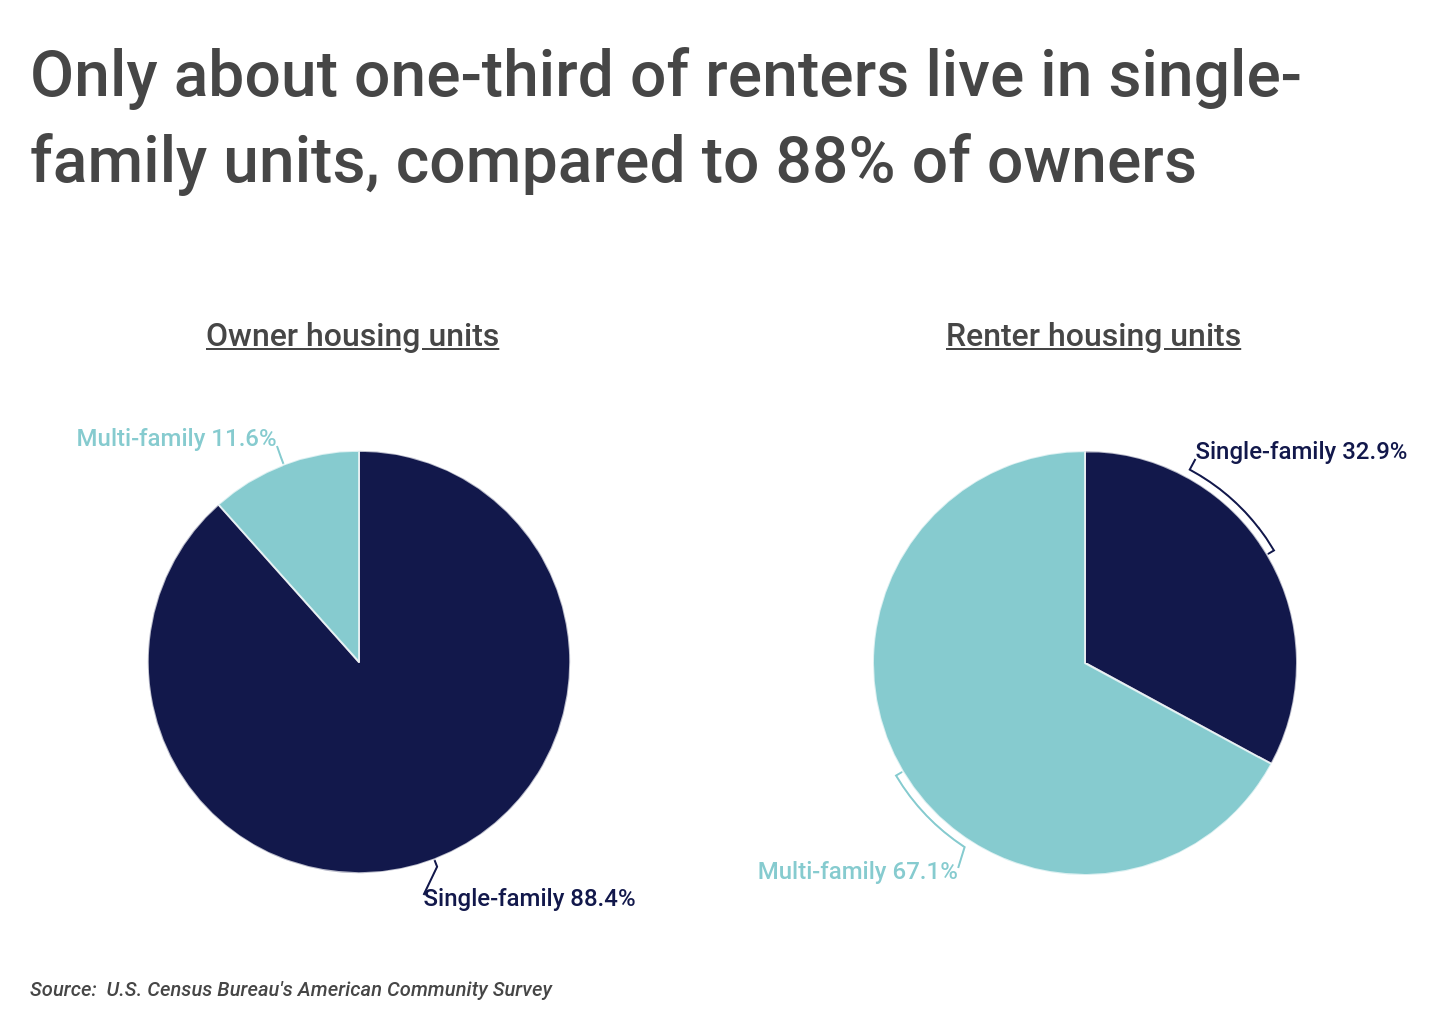 Chart2_About 1/3 of renters live in single-family units vs 88% of owners